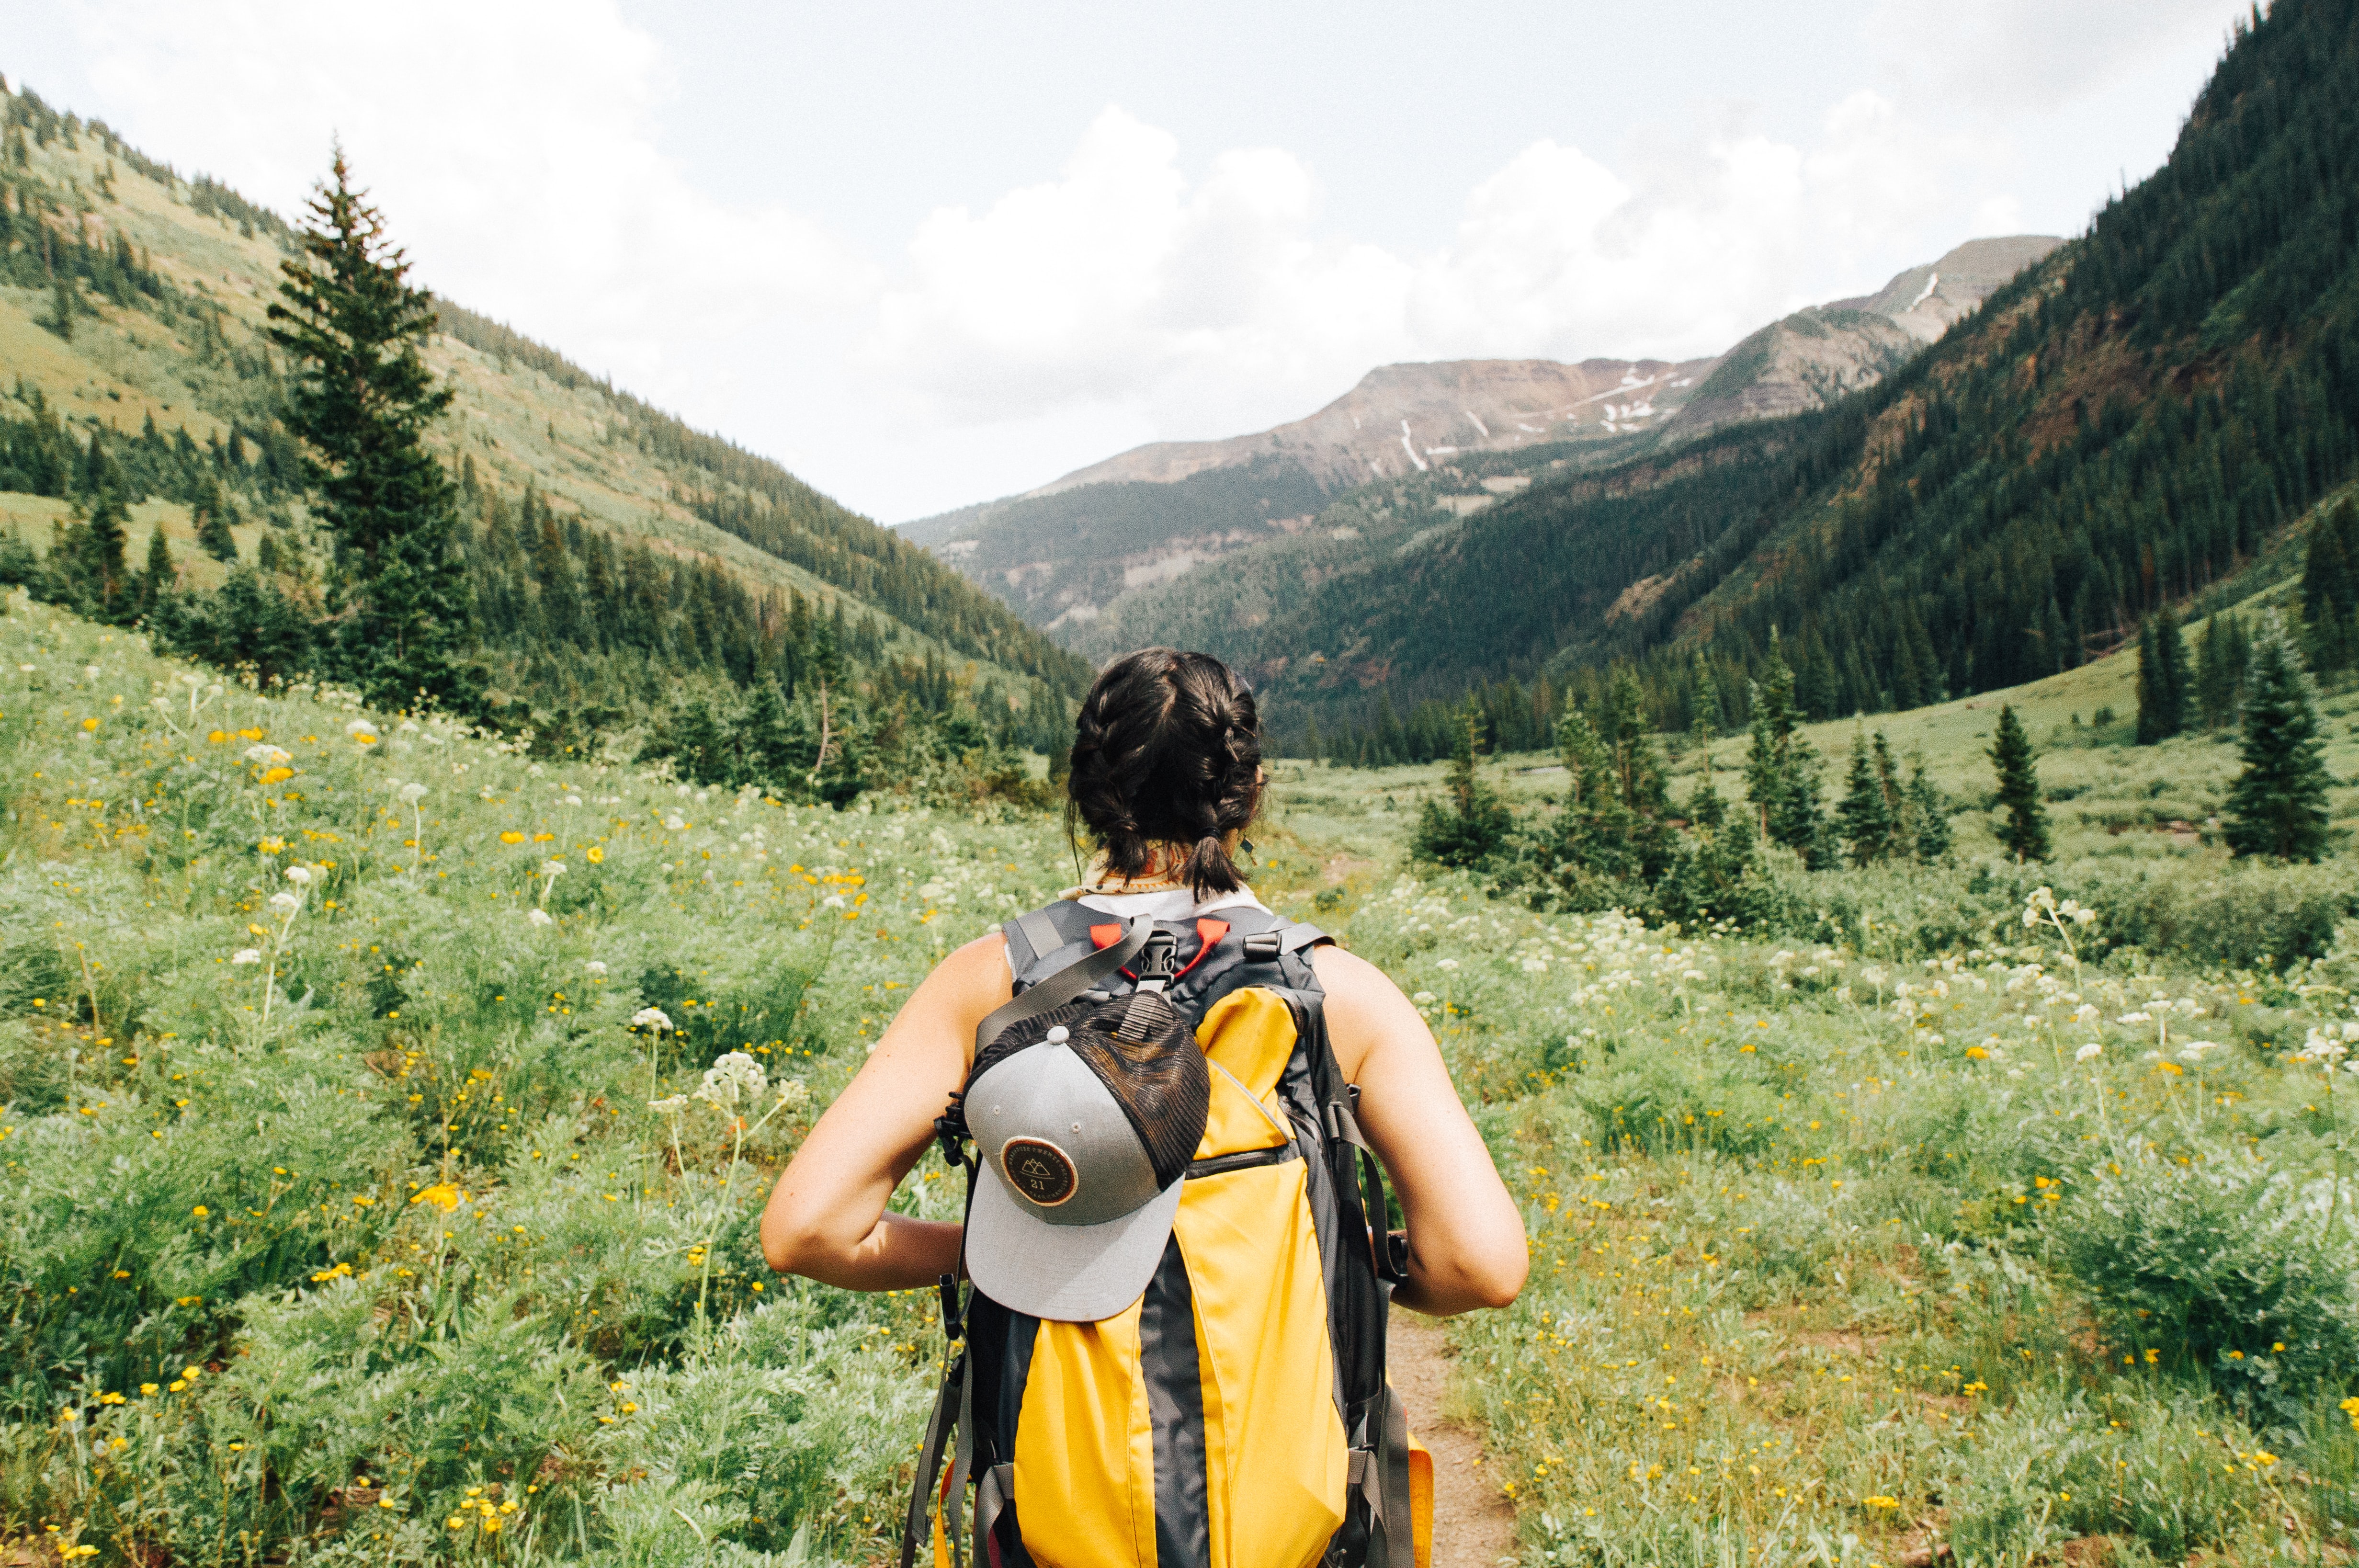 A person wearing a day pack hikes into a beautiful mountain landscape.